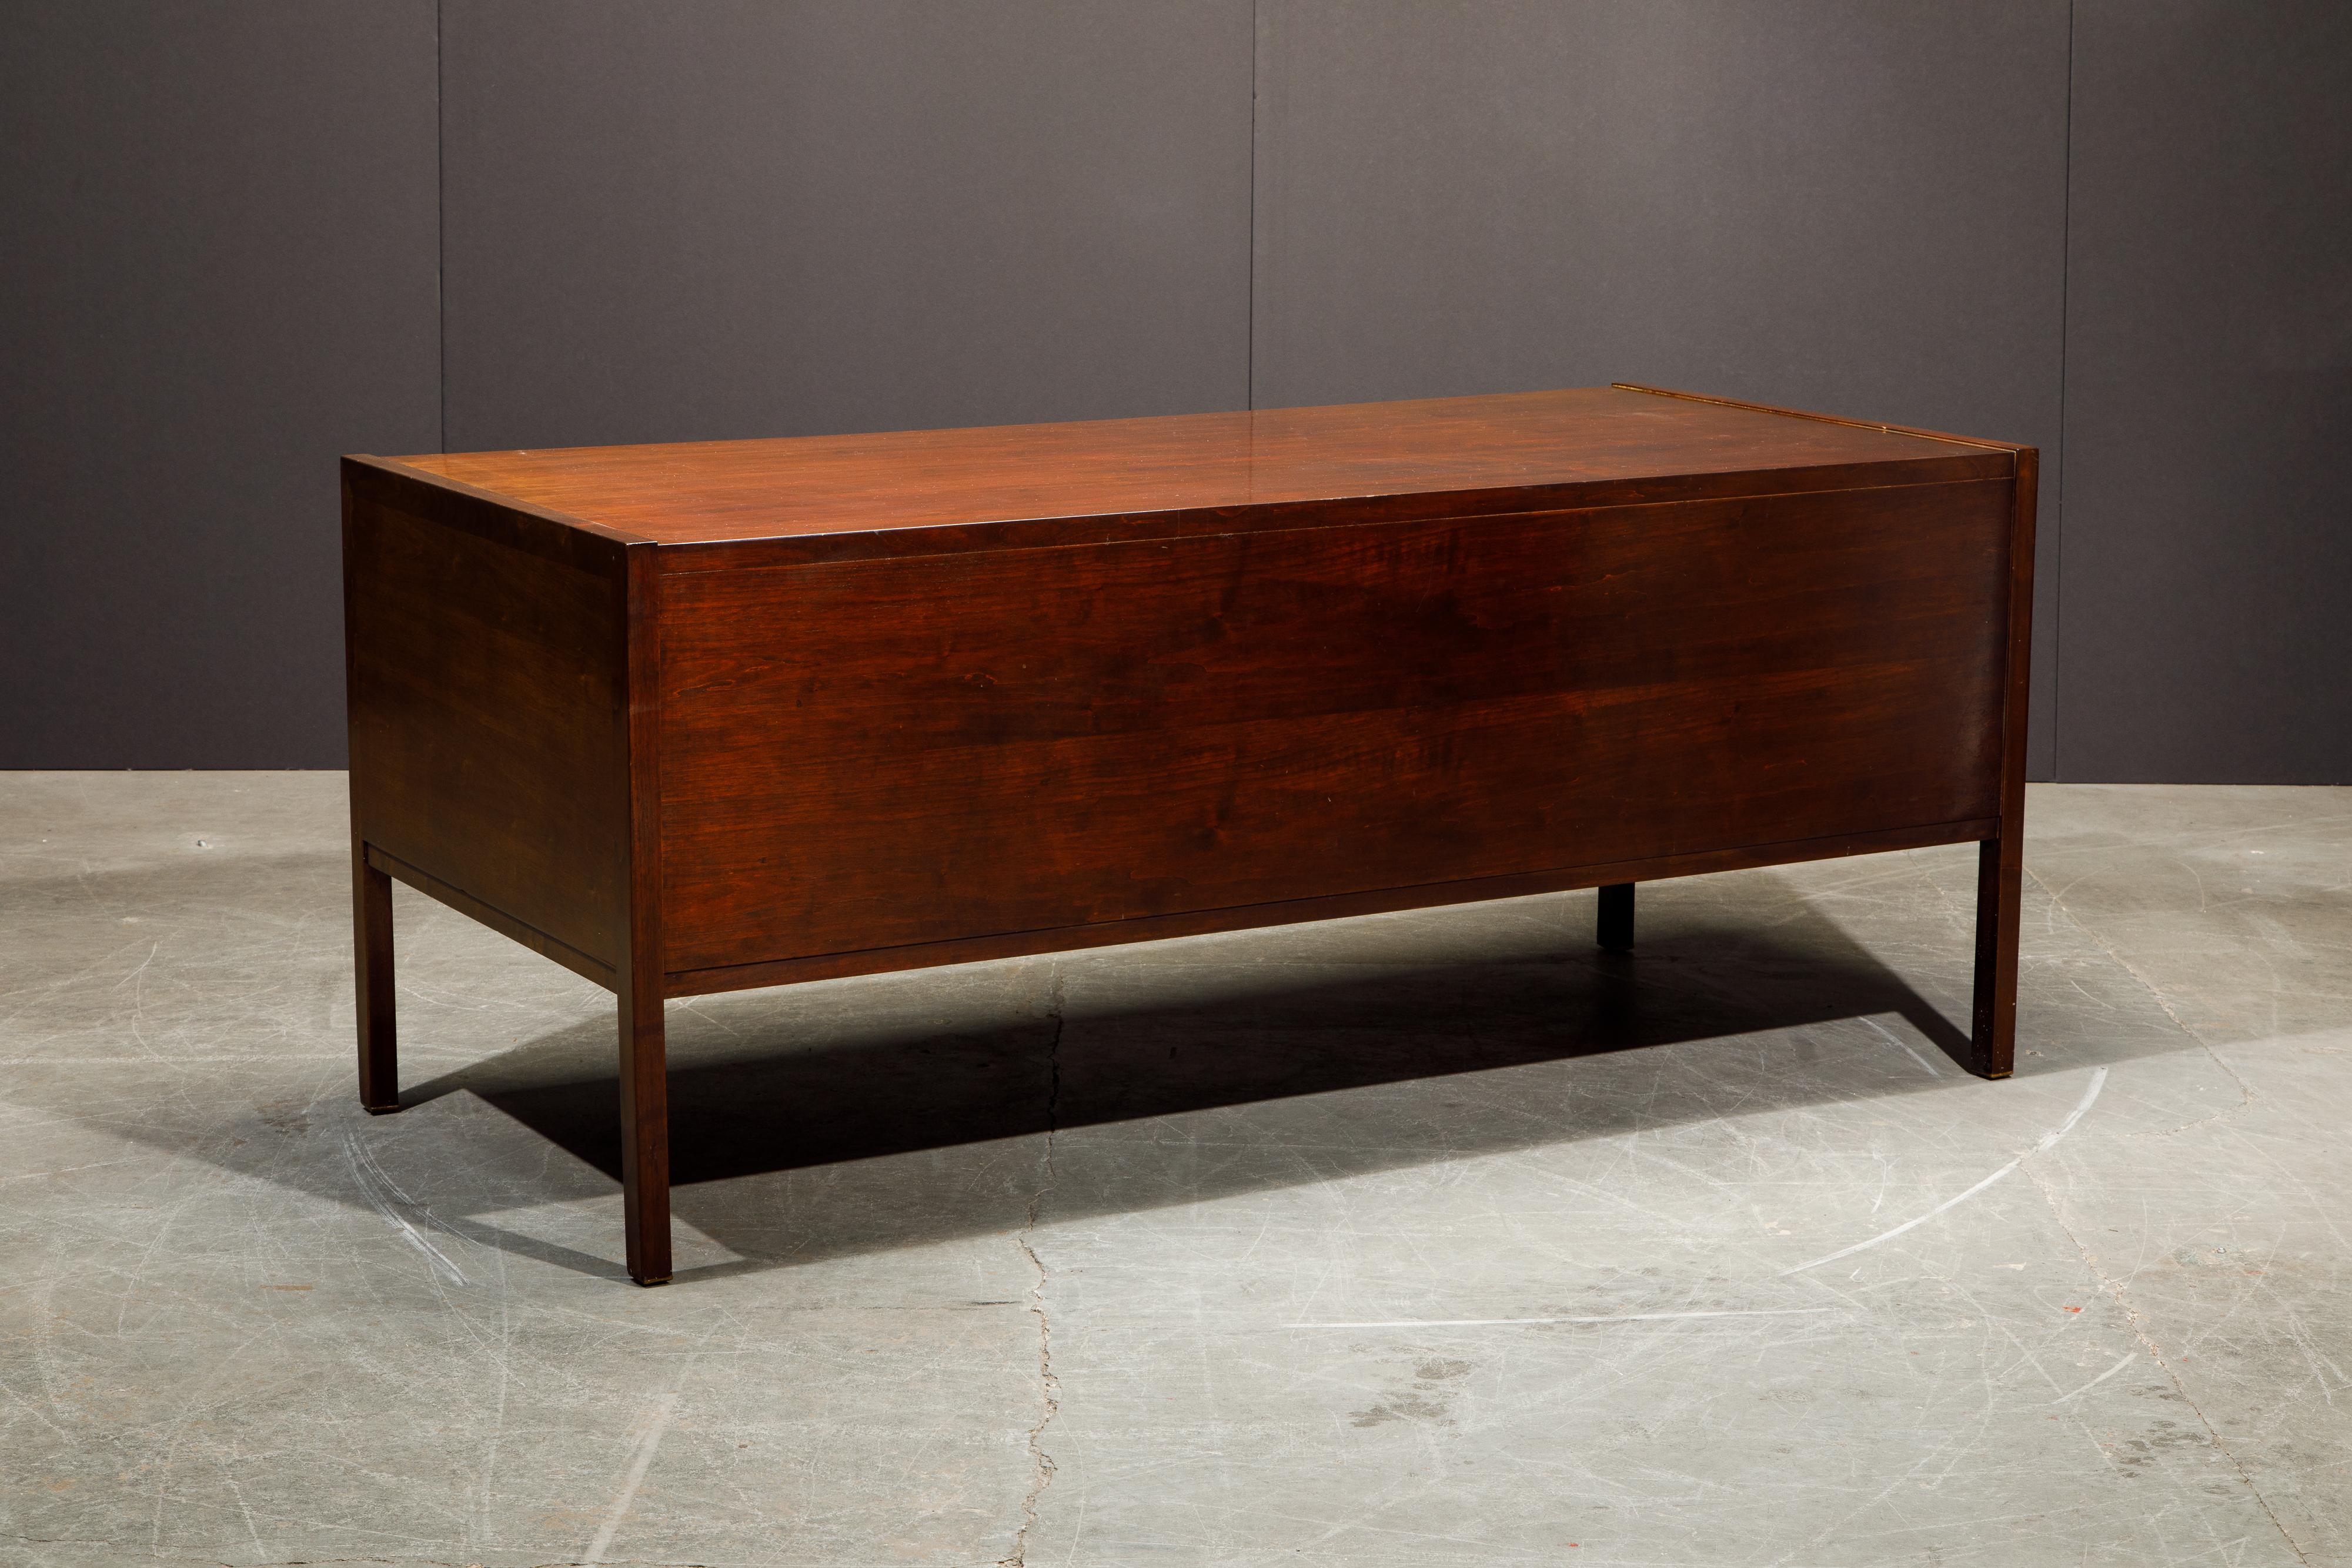 Brass Rosewood and Mahogany Executive Desk by Edward Wormley for Dunbar, 1963, Signed